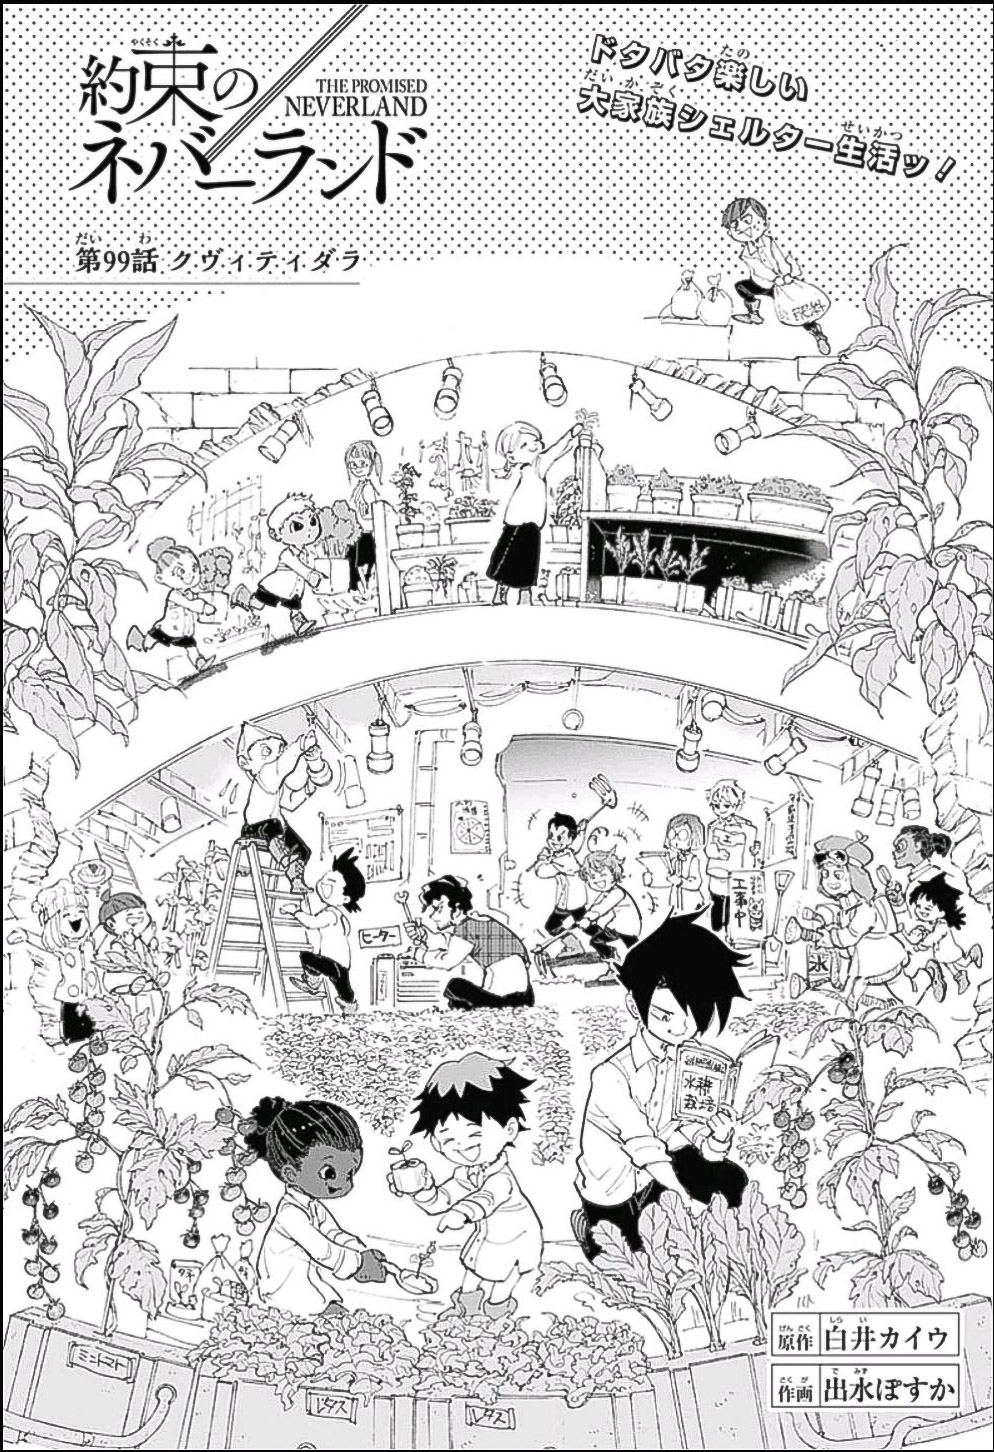 Chapter 99 The Promised Neverland Wiki Fandom